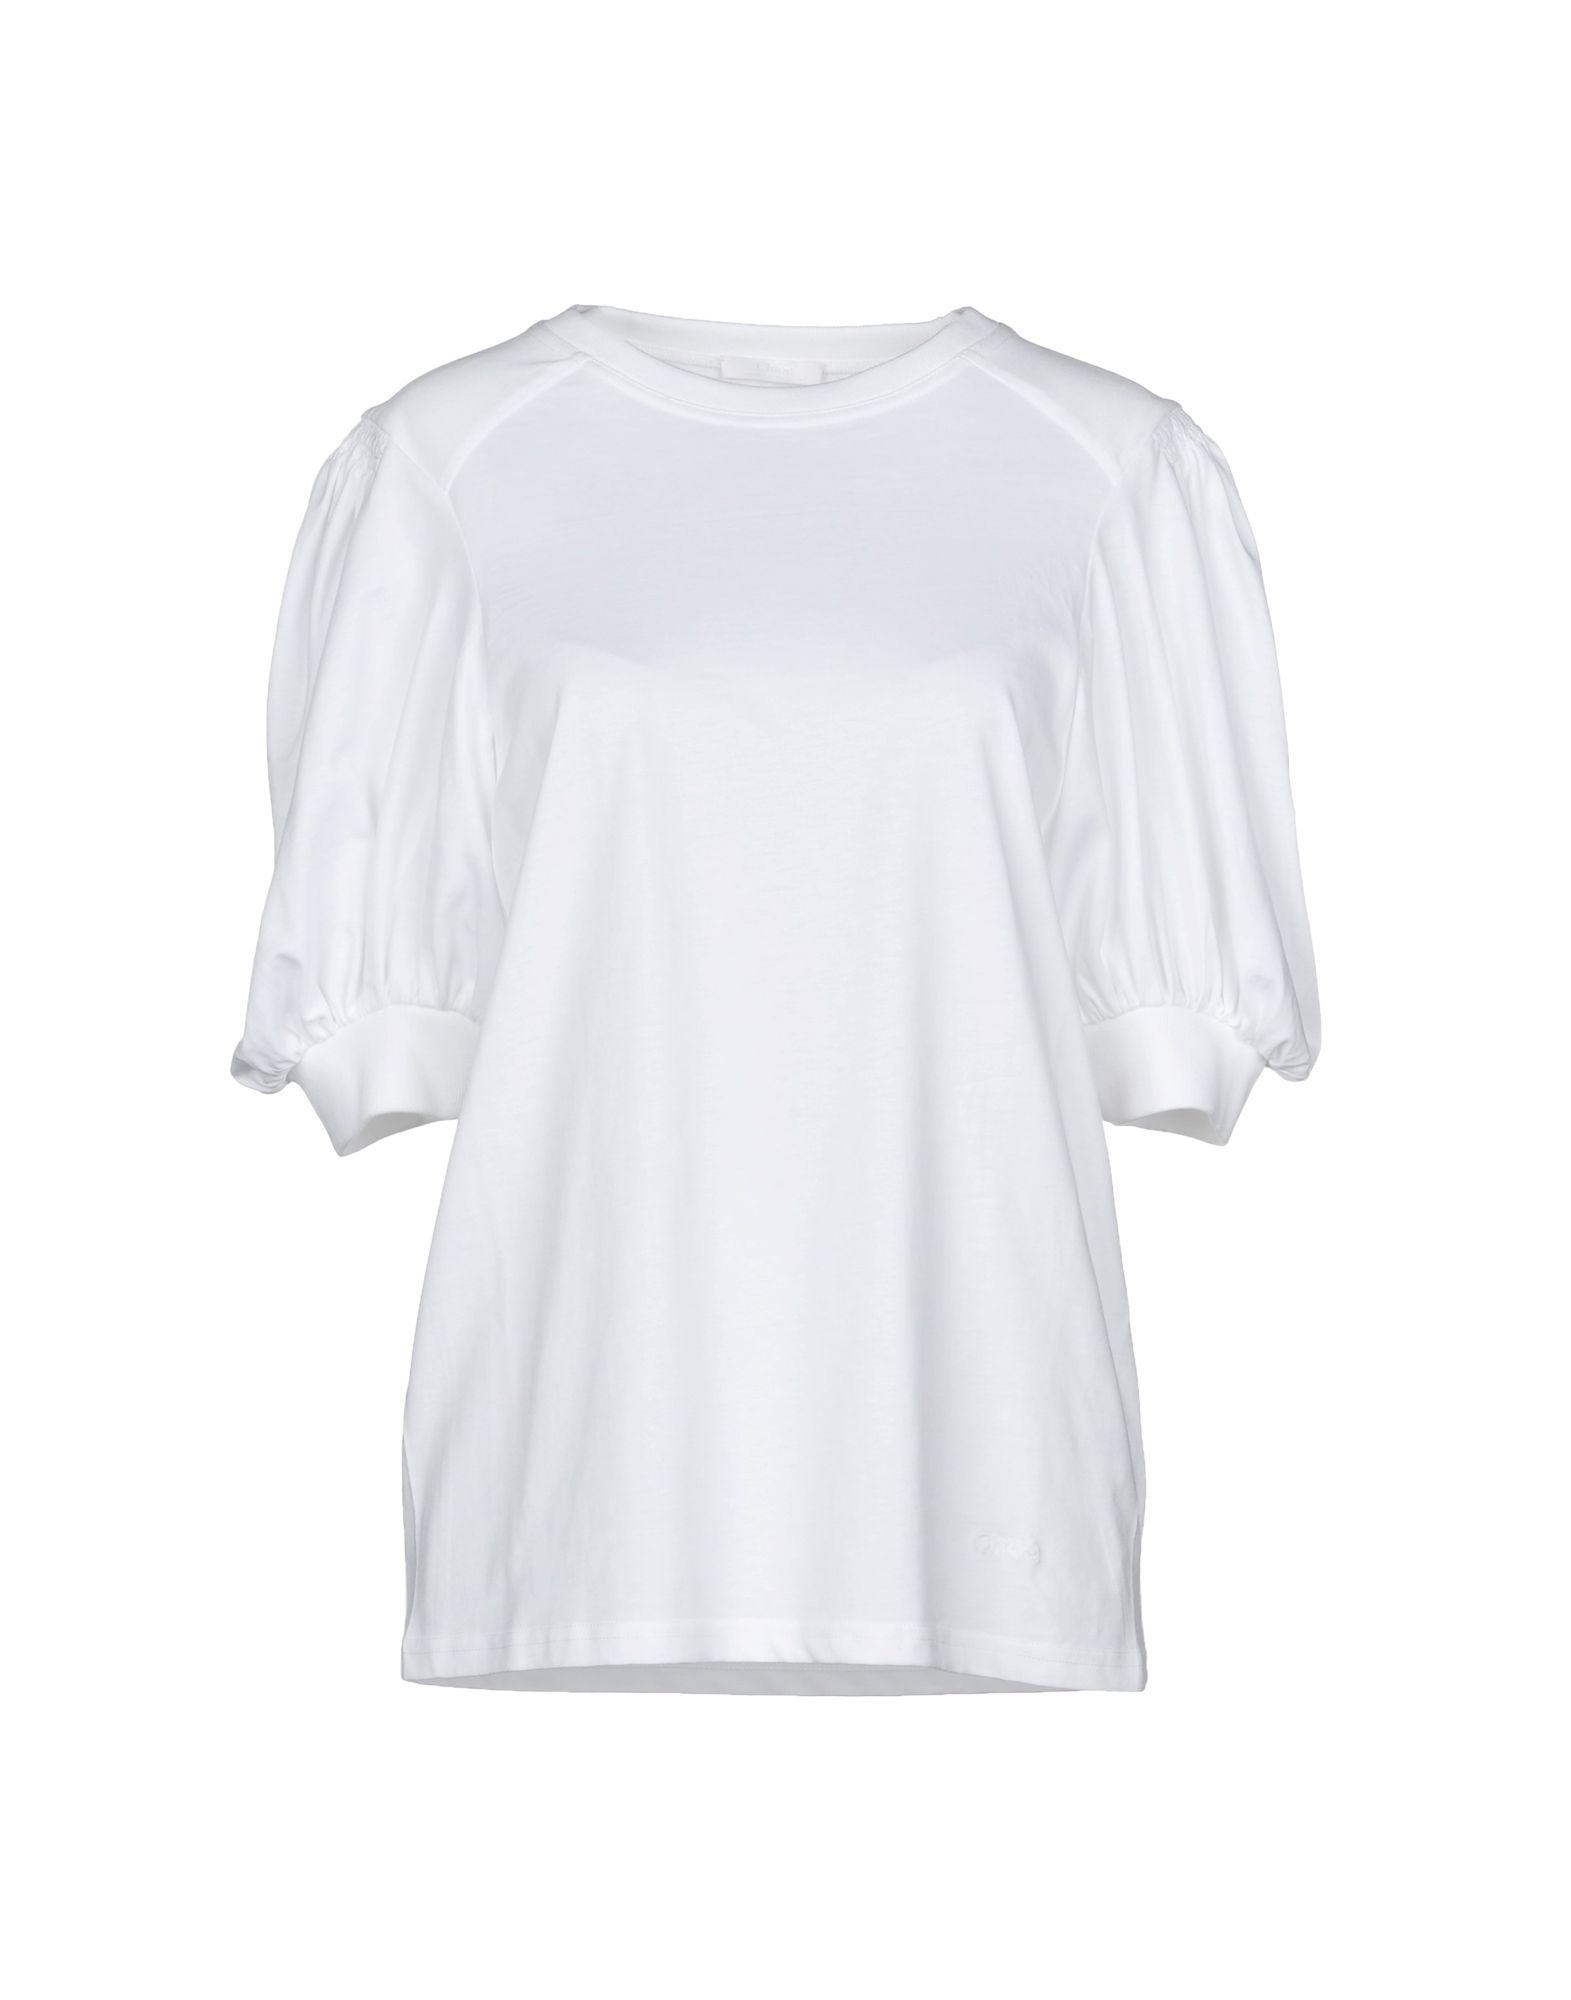 Chloé Cotton T-shirt in White - Lyst